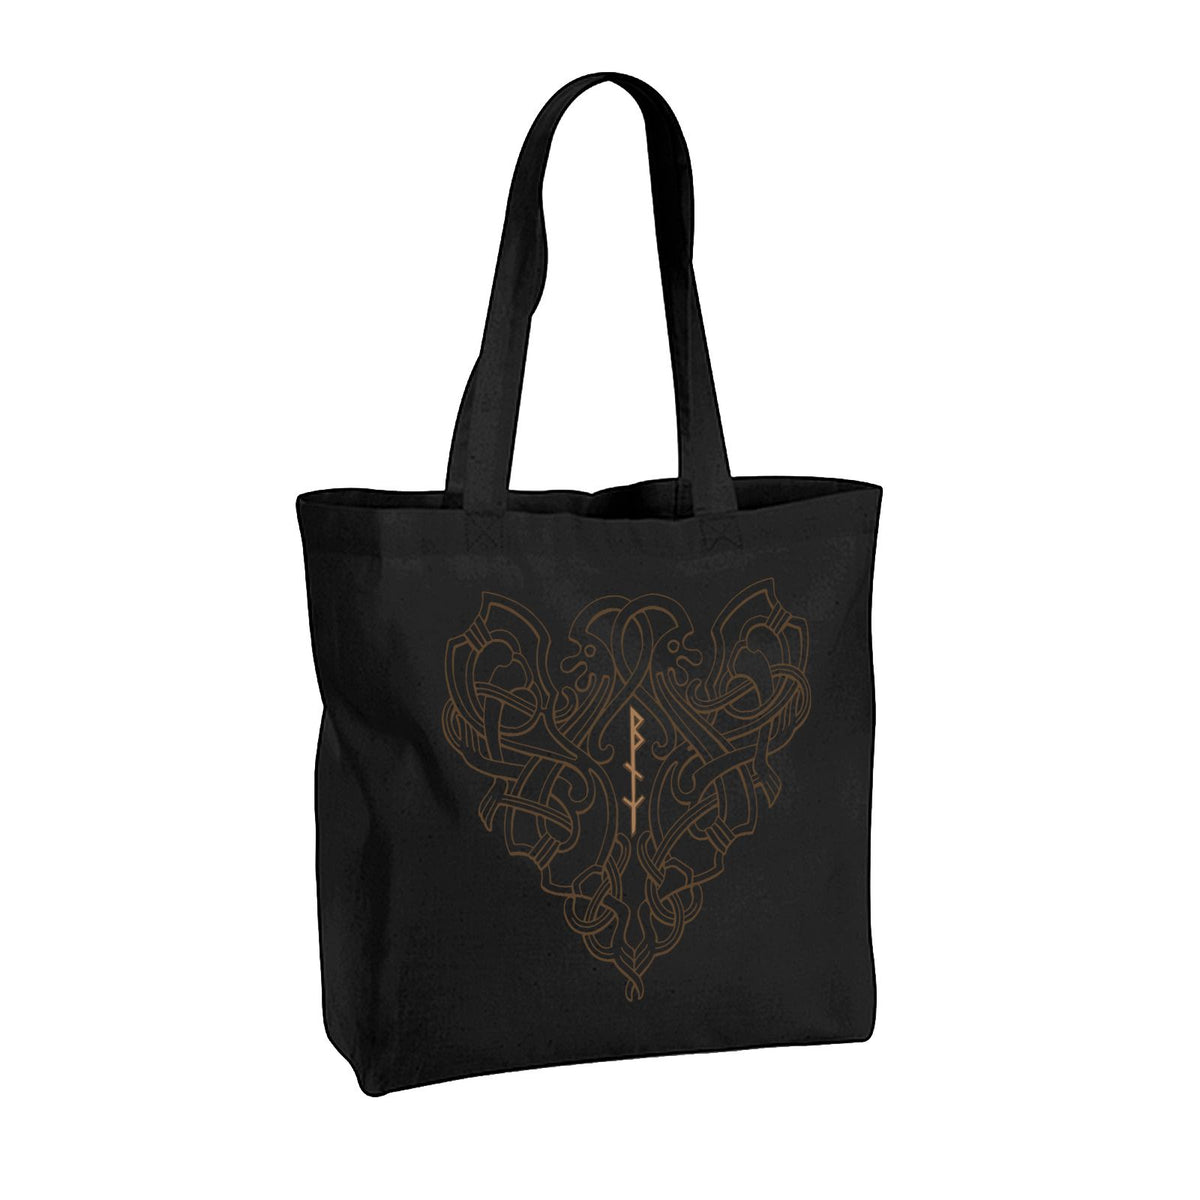 By Norse Music - Wood Carving shopping bag - black – ByNorse Music